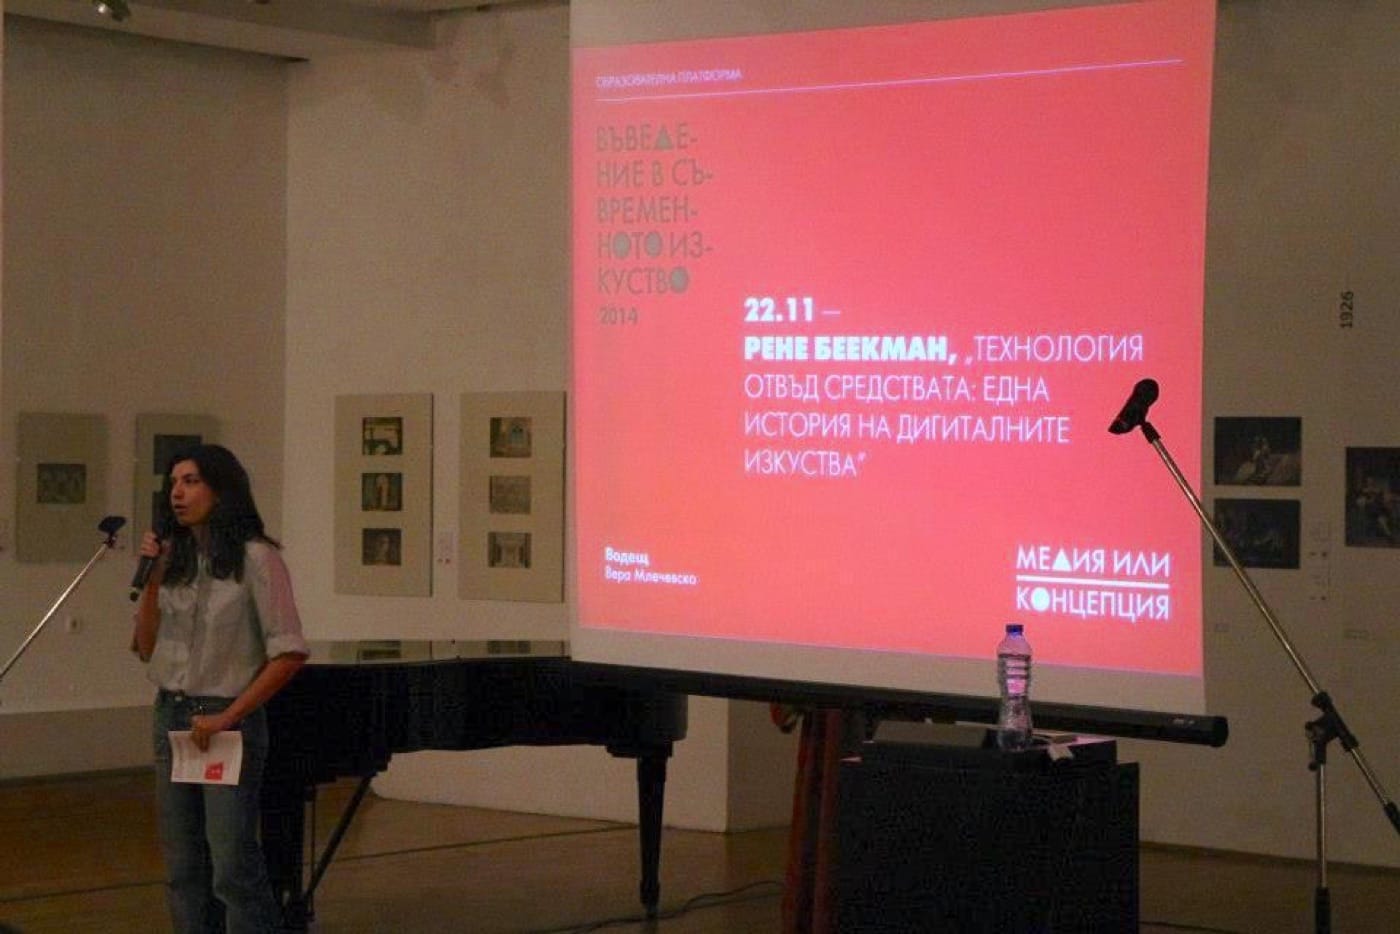 Presentation Technology Beyond Means by Rene Beekman at the Sofia City Gallery